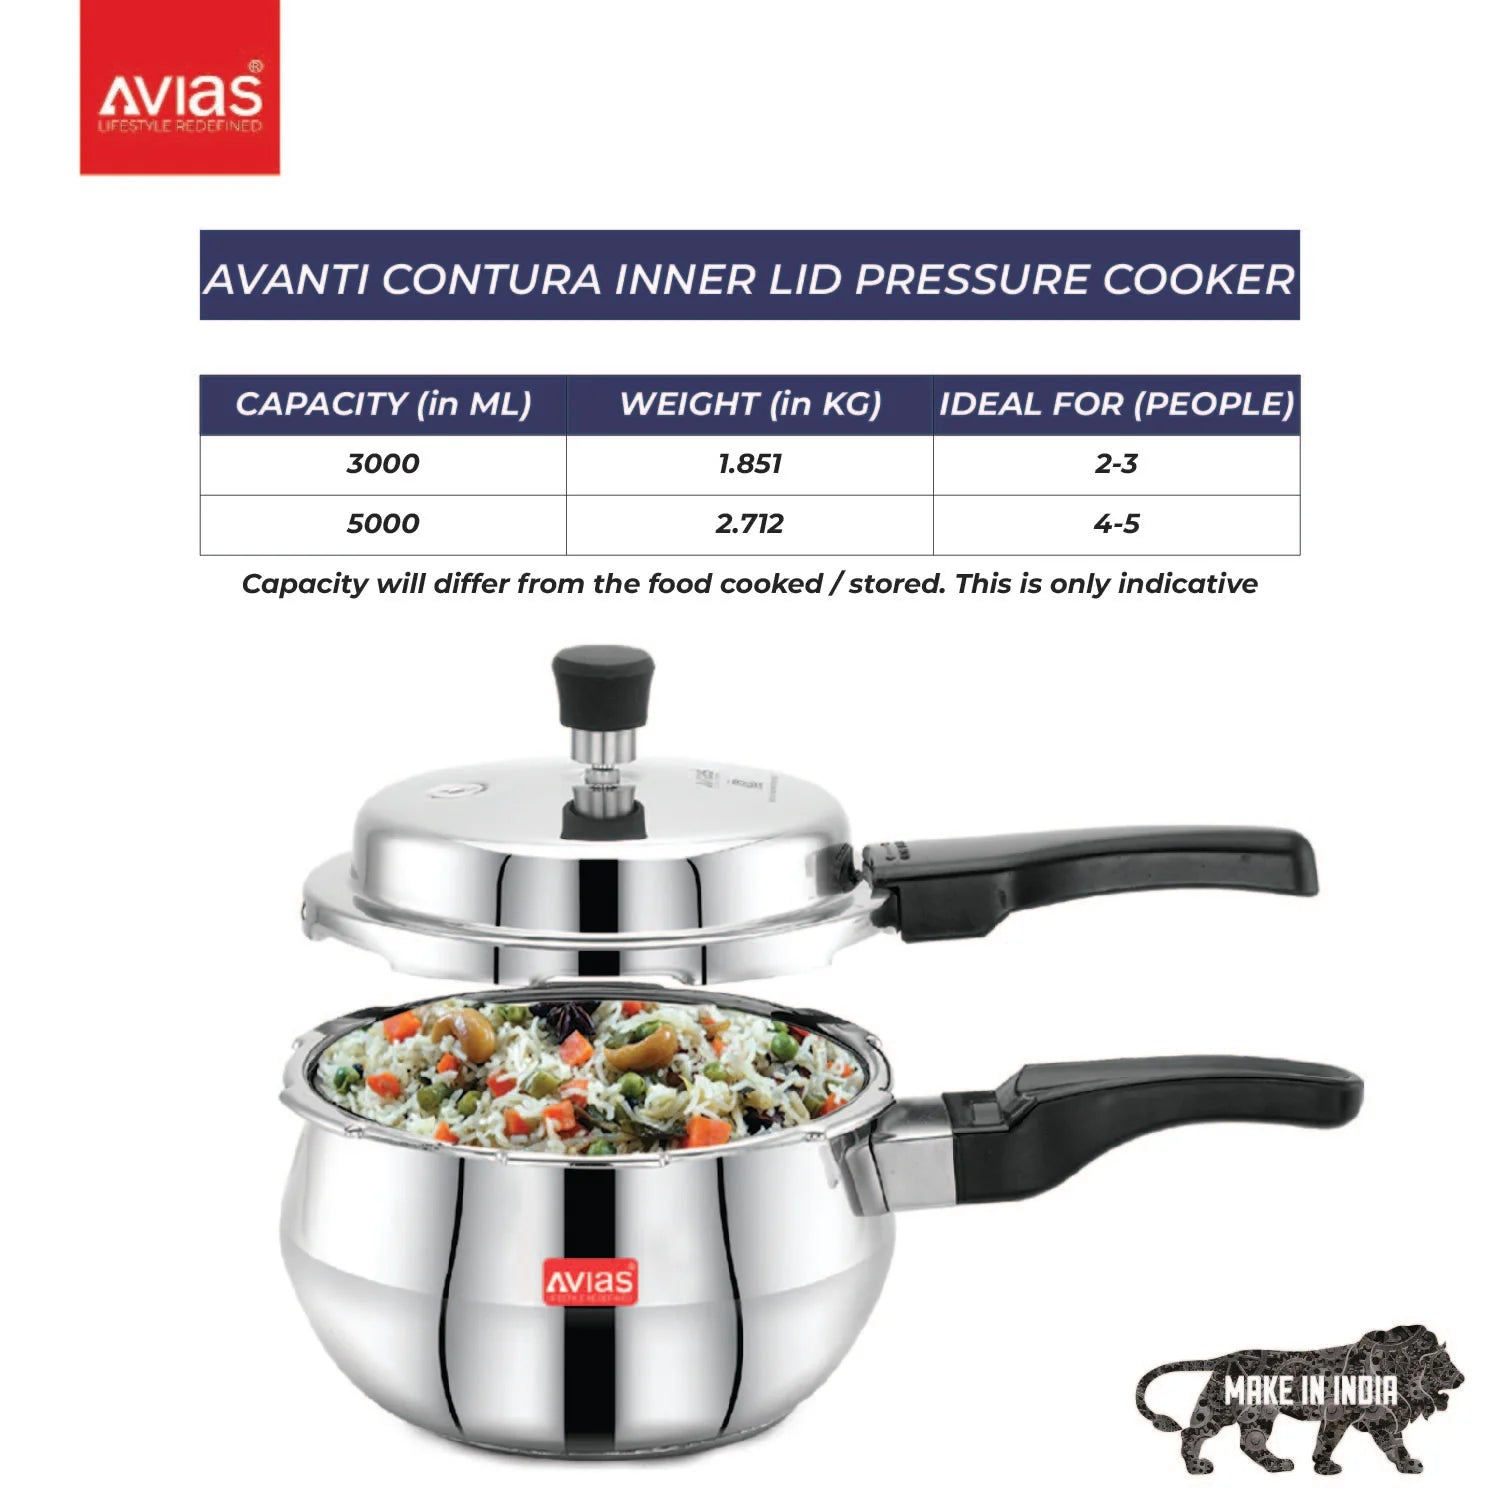 AVIAS Avanti Handi high-quality stainless steel pressure cooker capacilty and weight